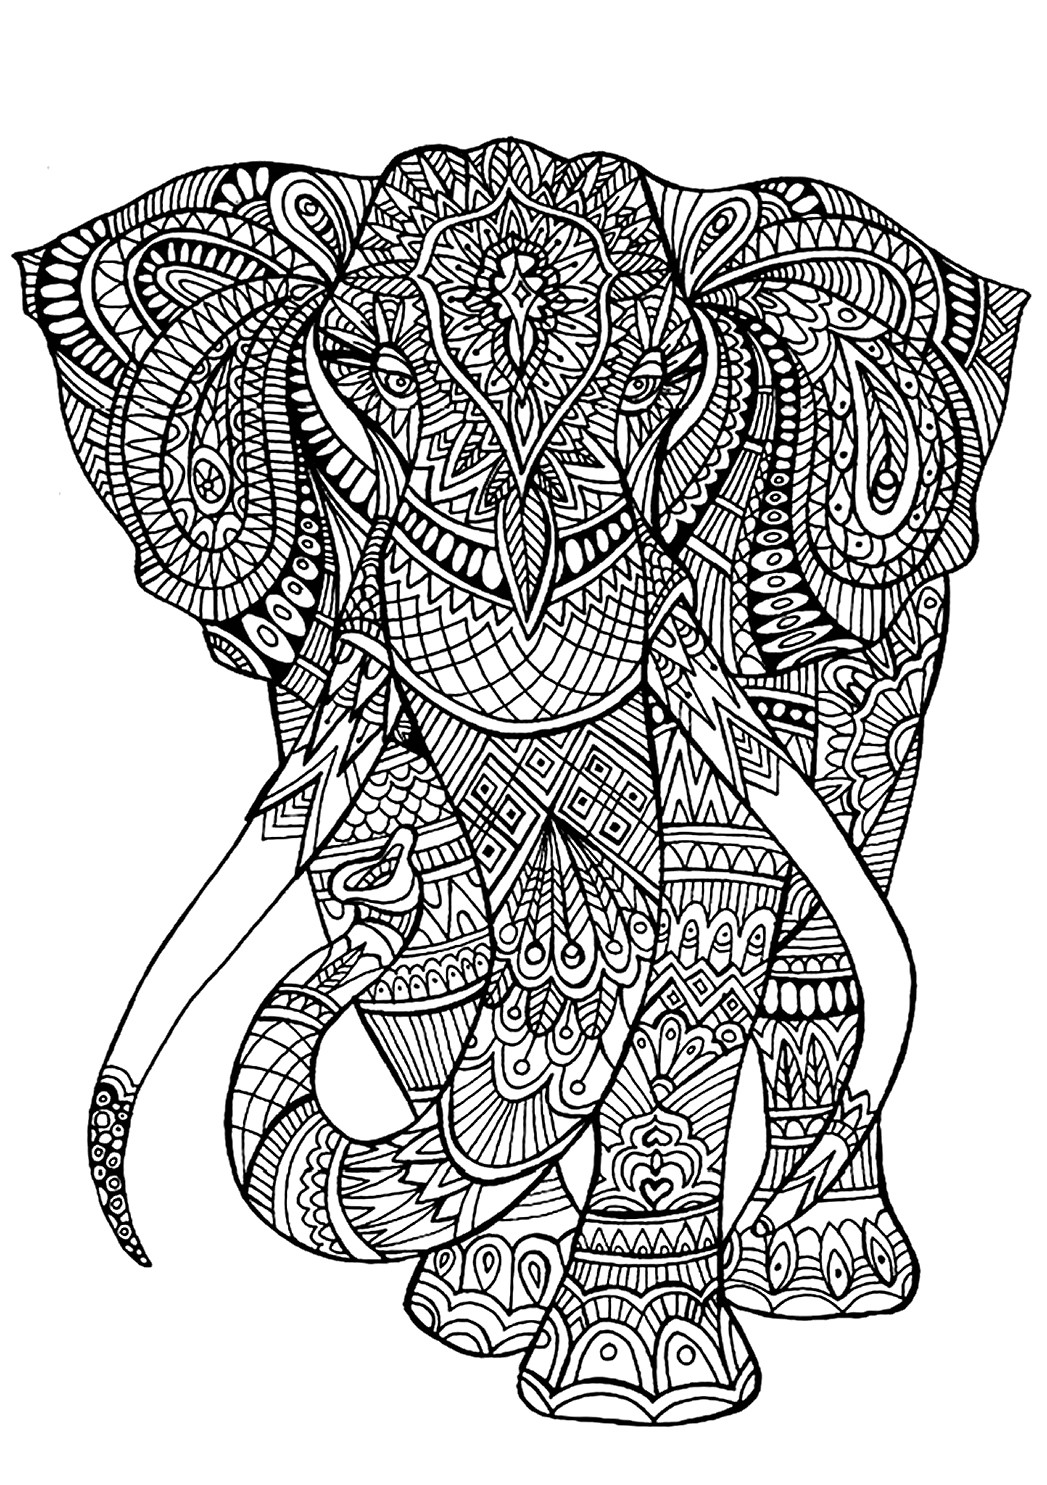 Elephant Coloring Book For Adults
 like this one intended for adults to color can